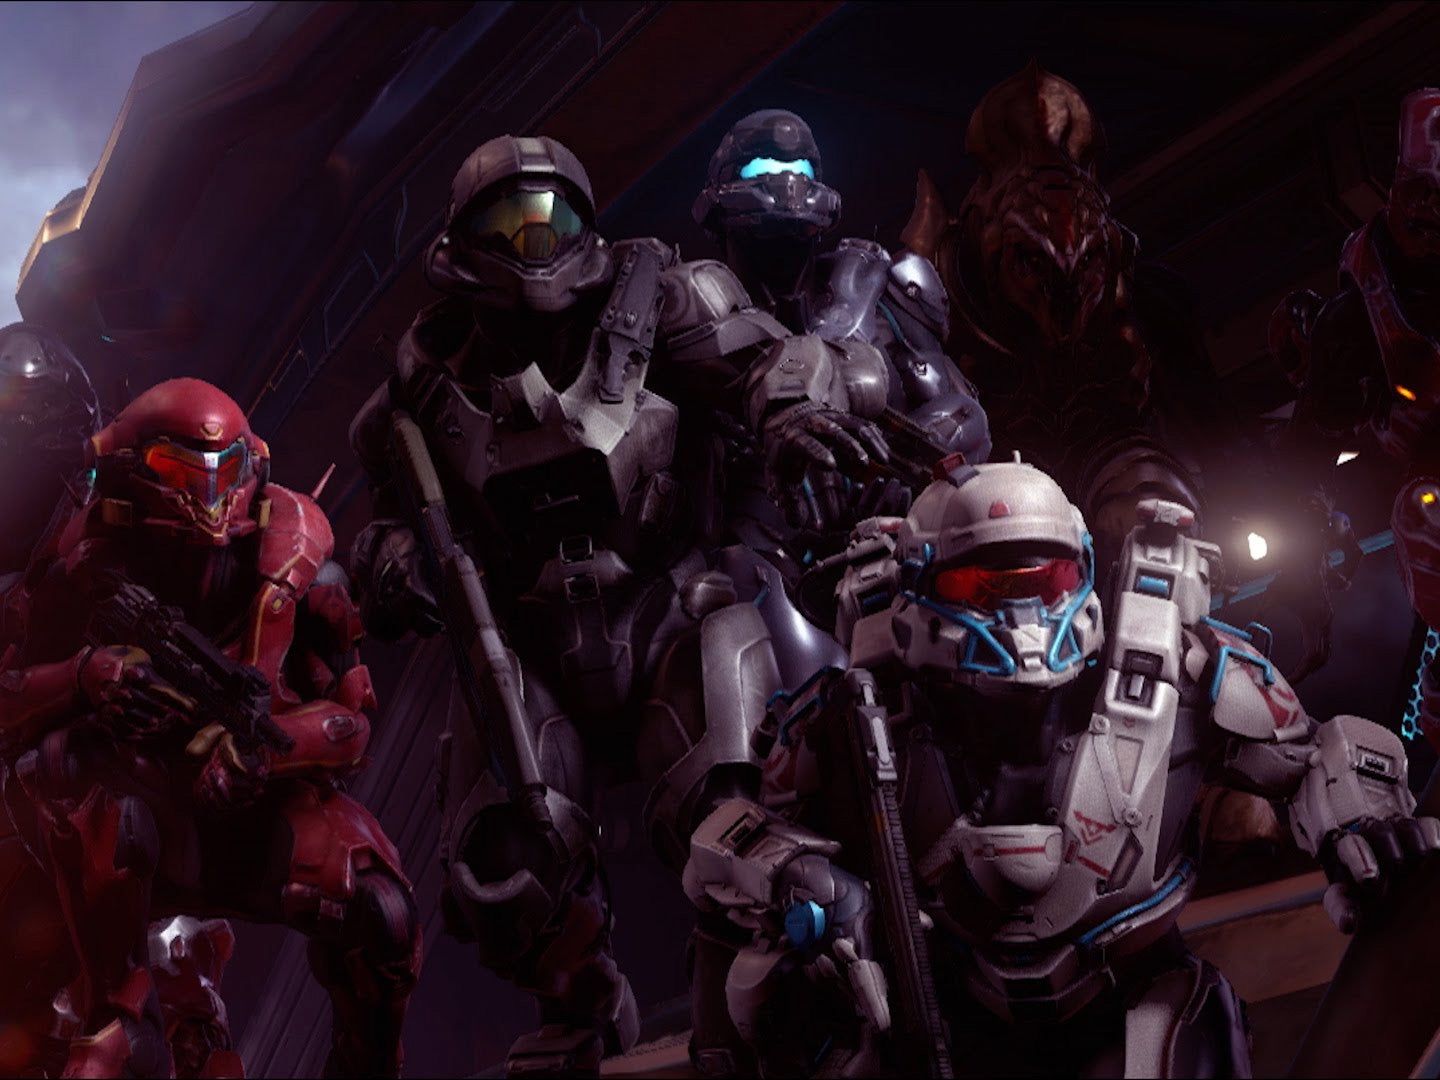 Halo 5: Guardians has the potential to be one of 2015's biggest releases for Xbox One.